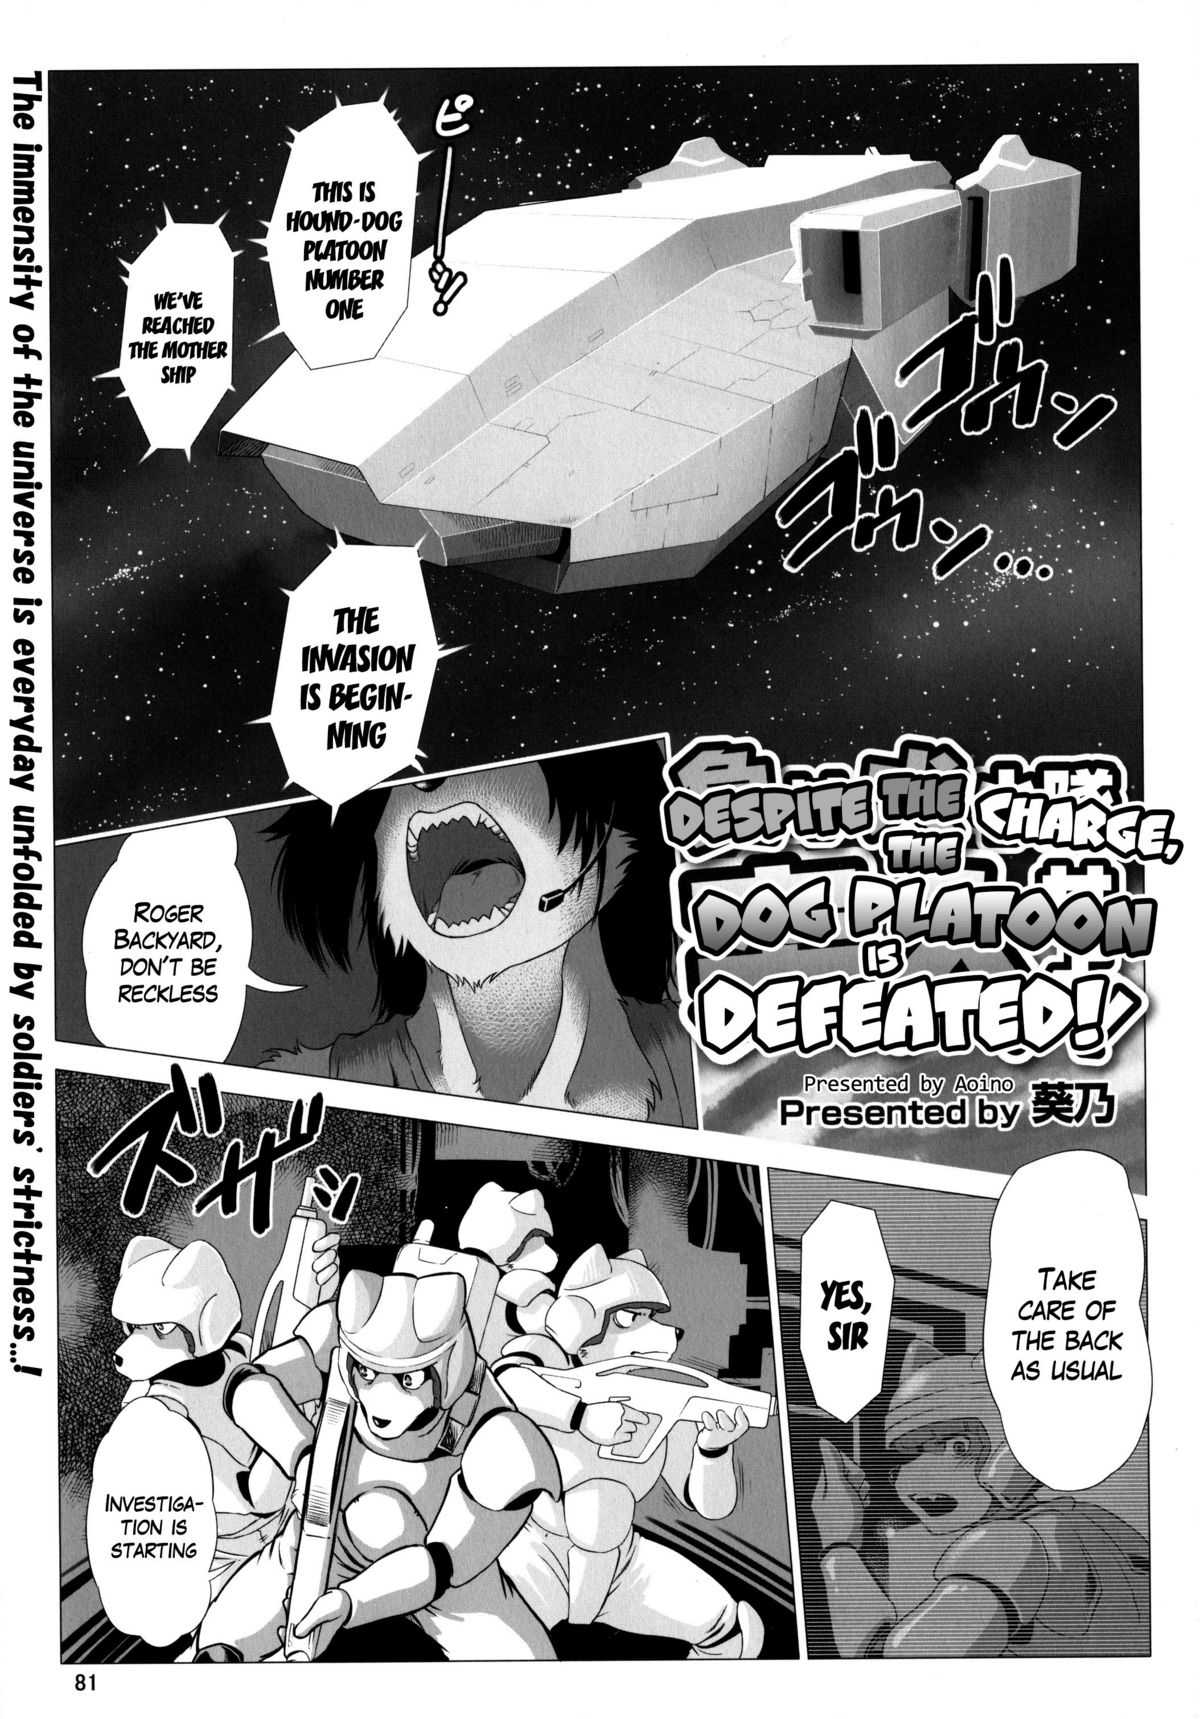 [Aoino] Despite the Charge, the Dog Platoon is Defeated! (Comic Kemostore 2) [English] 